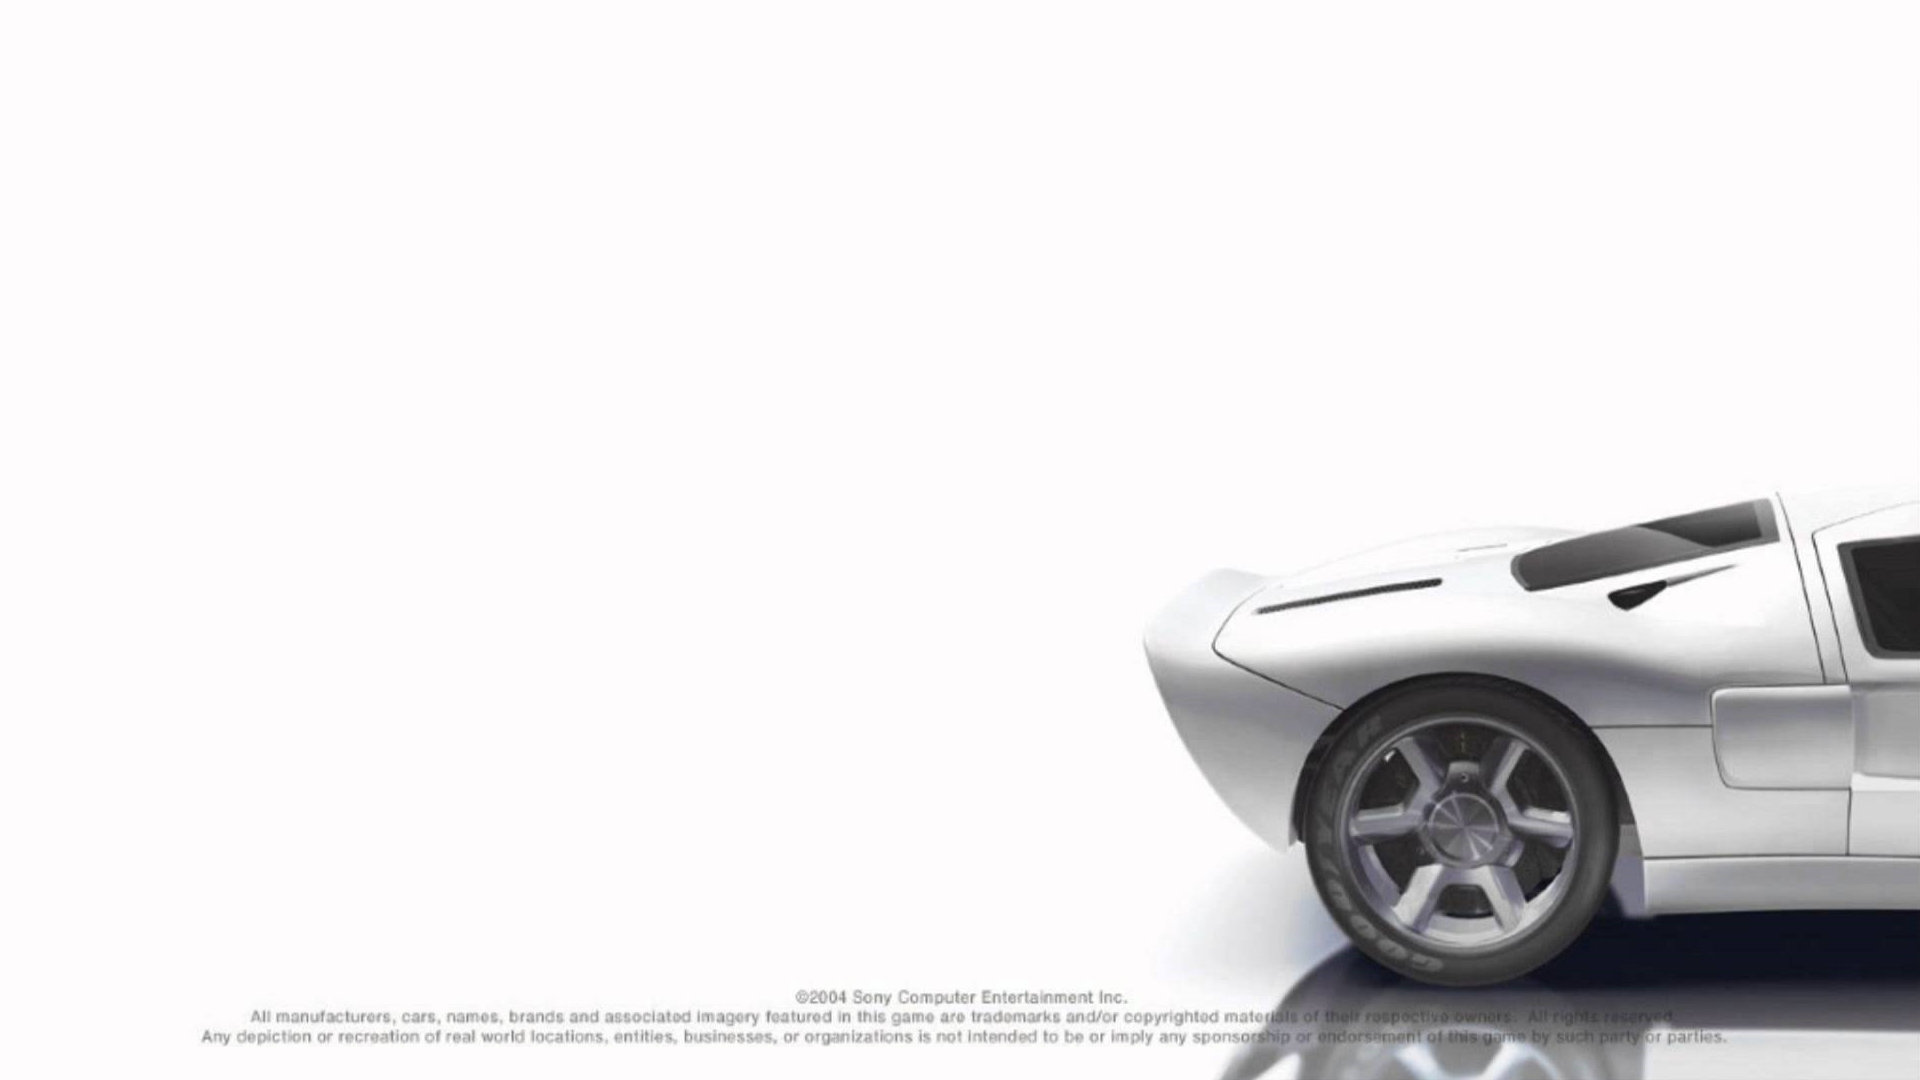 Gran Turismo 4 First Preview